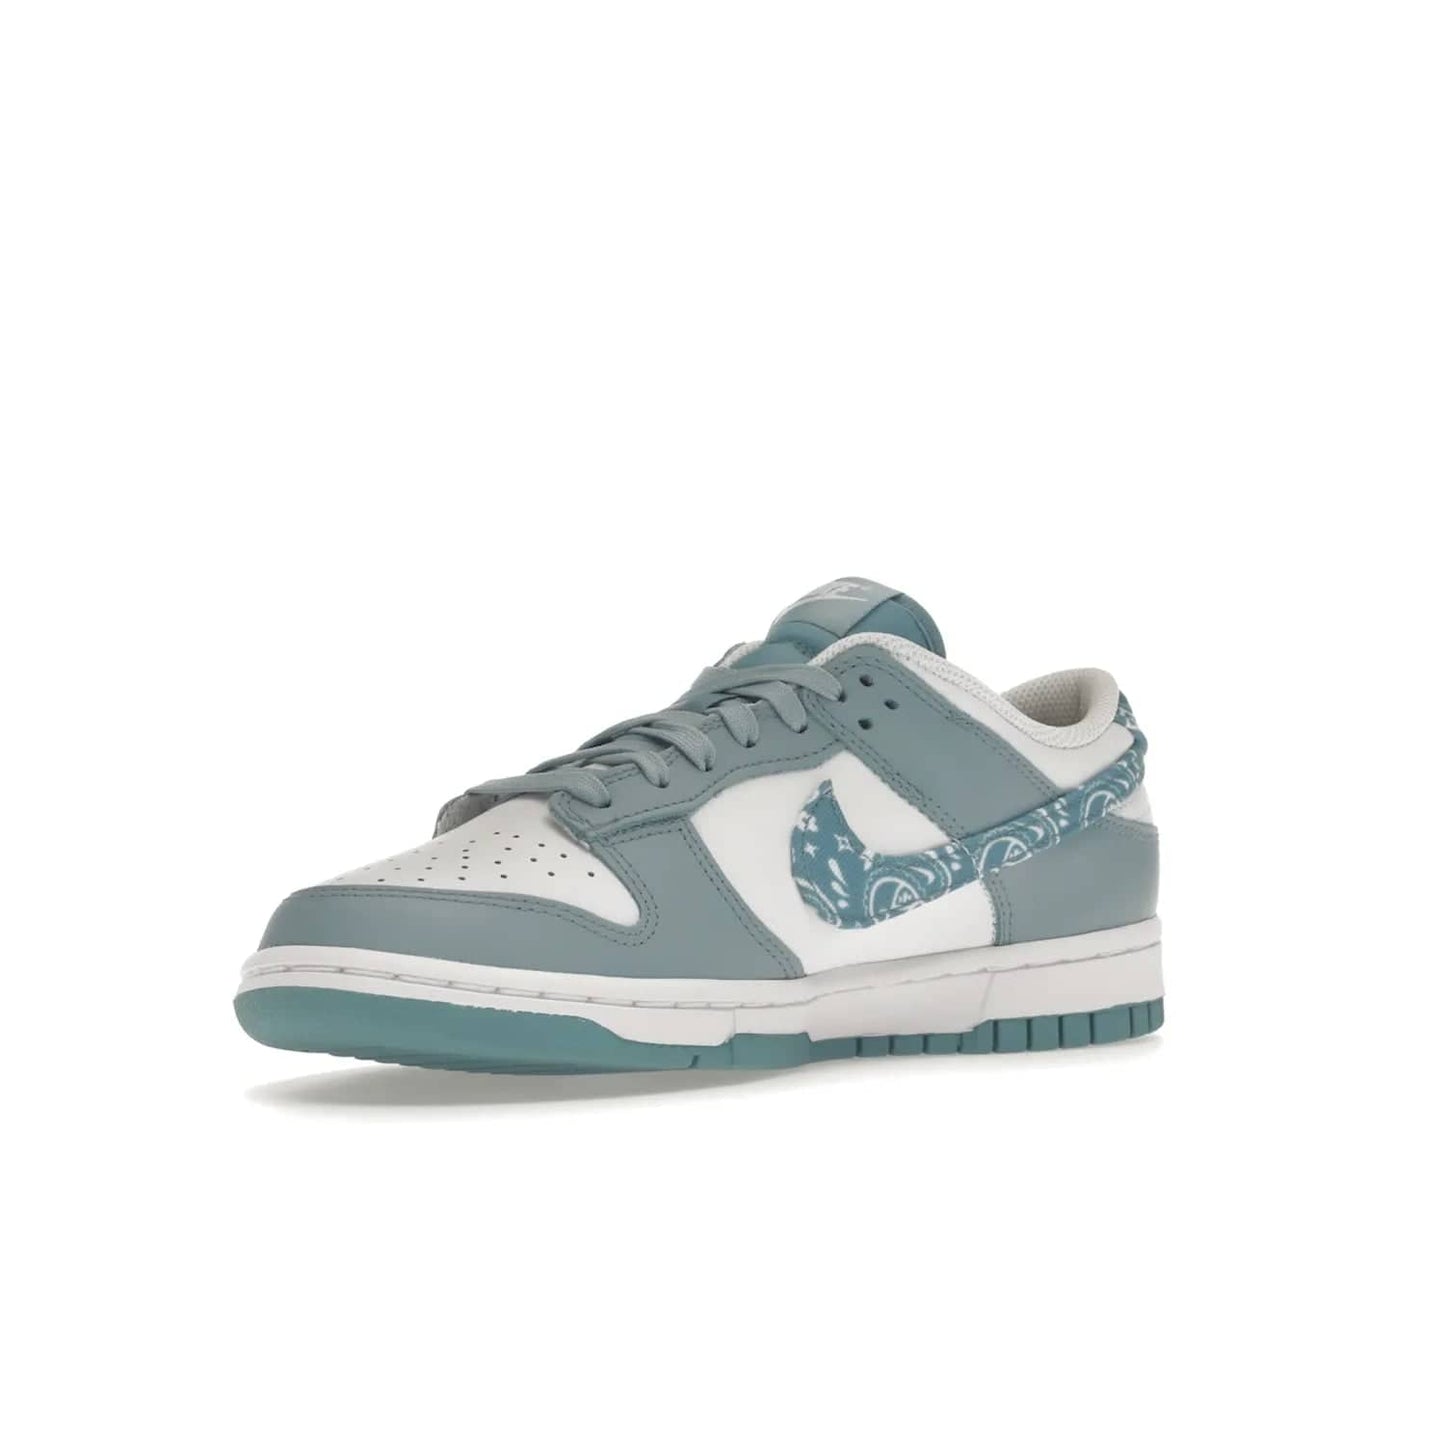 Nike Dunk Low Essential Paisley Pack Worn Blue (Women's) - Image 15 - Only at www.BallersClubKickz.com - Get the Nike Dunk Low Essential Paisley Pack Worn Blue (Women's) for style and comfort. White leather construction, light blue leather overlays, canvas Swooshes and matching heel tabs offer a rich blue hue. Finished by a white and light blue sole, this classic Nike Dunk is the perfect addition to any wardrobe. Released in March 2022.